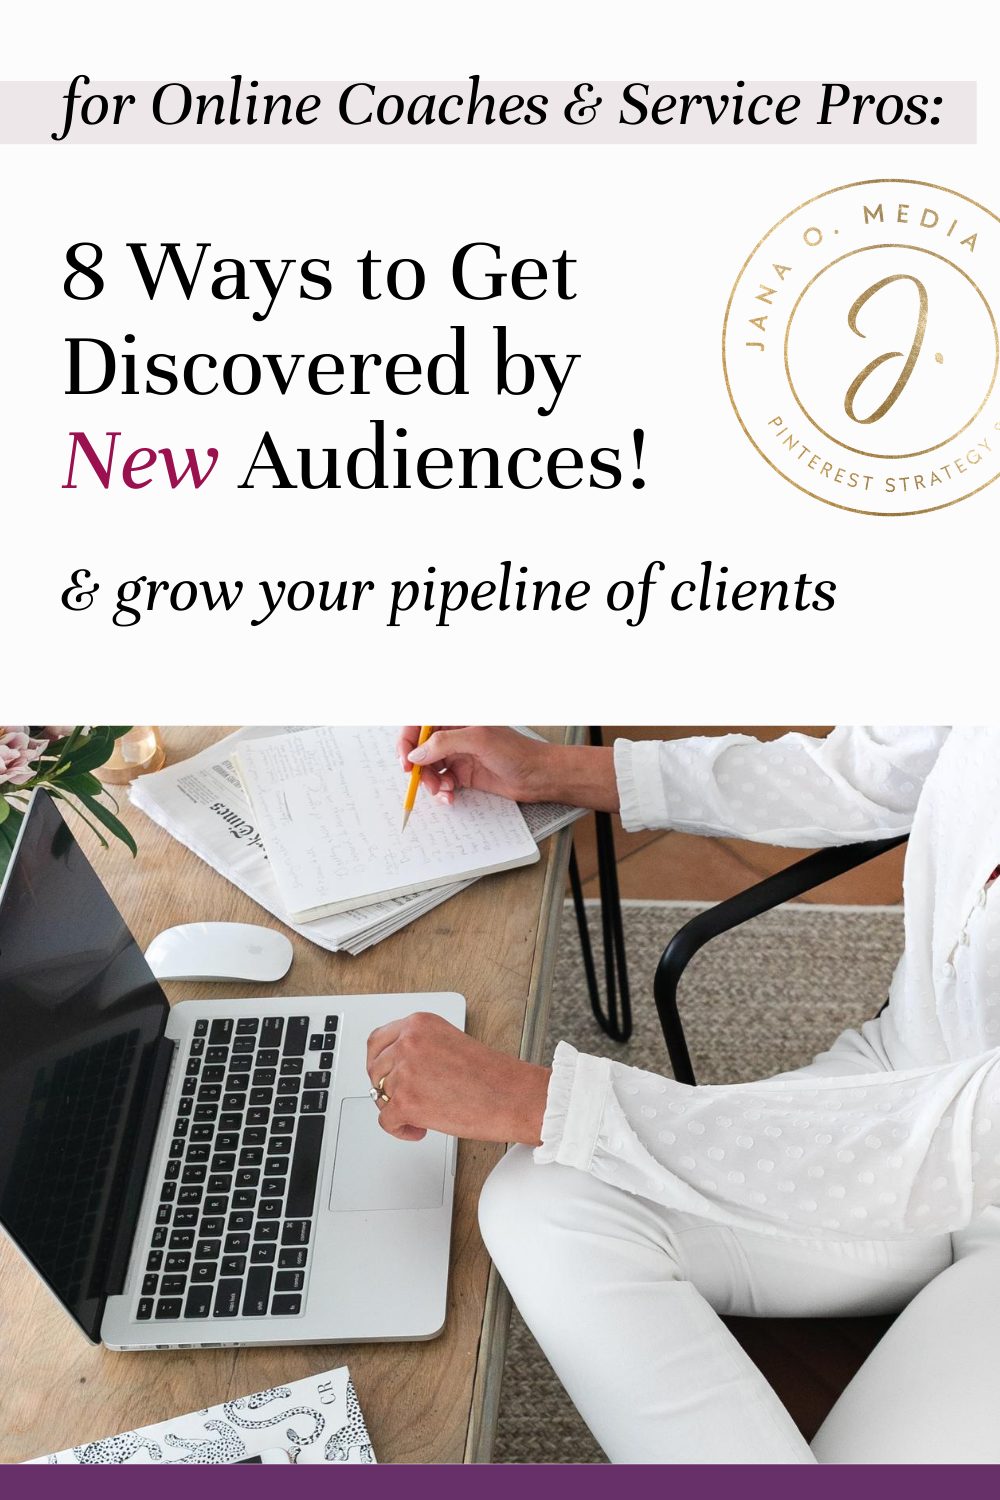 Online coaches: 8 Wyas to Grow Your Audience with New Ideal Coaching Clients. As an online coach, nurturing your audience is important. But it's equally critical to grow & fill your pipeline with ideal coaching clients.  